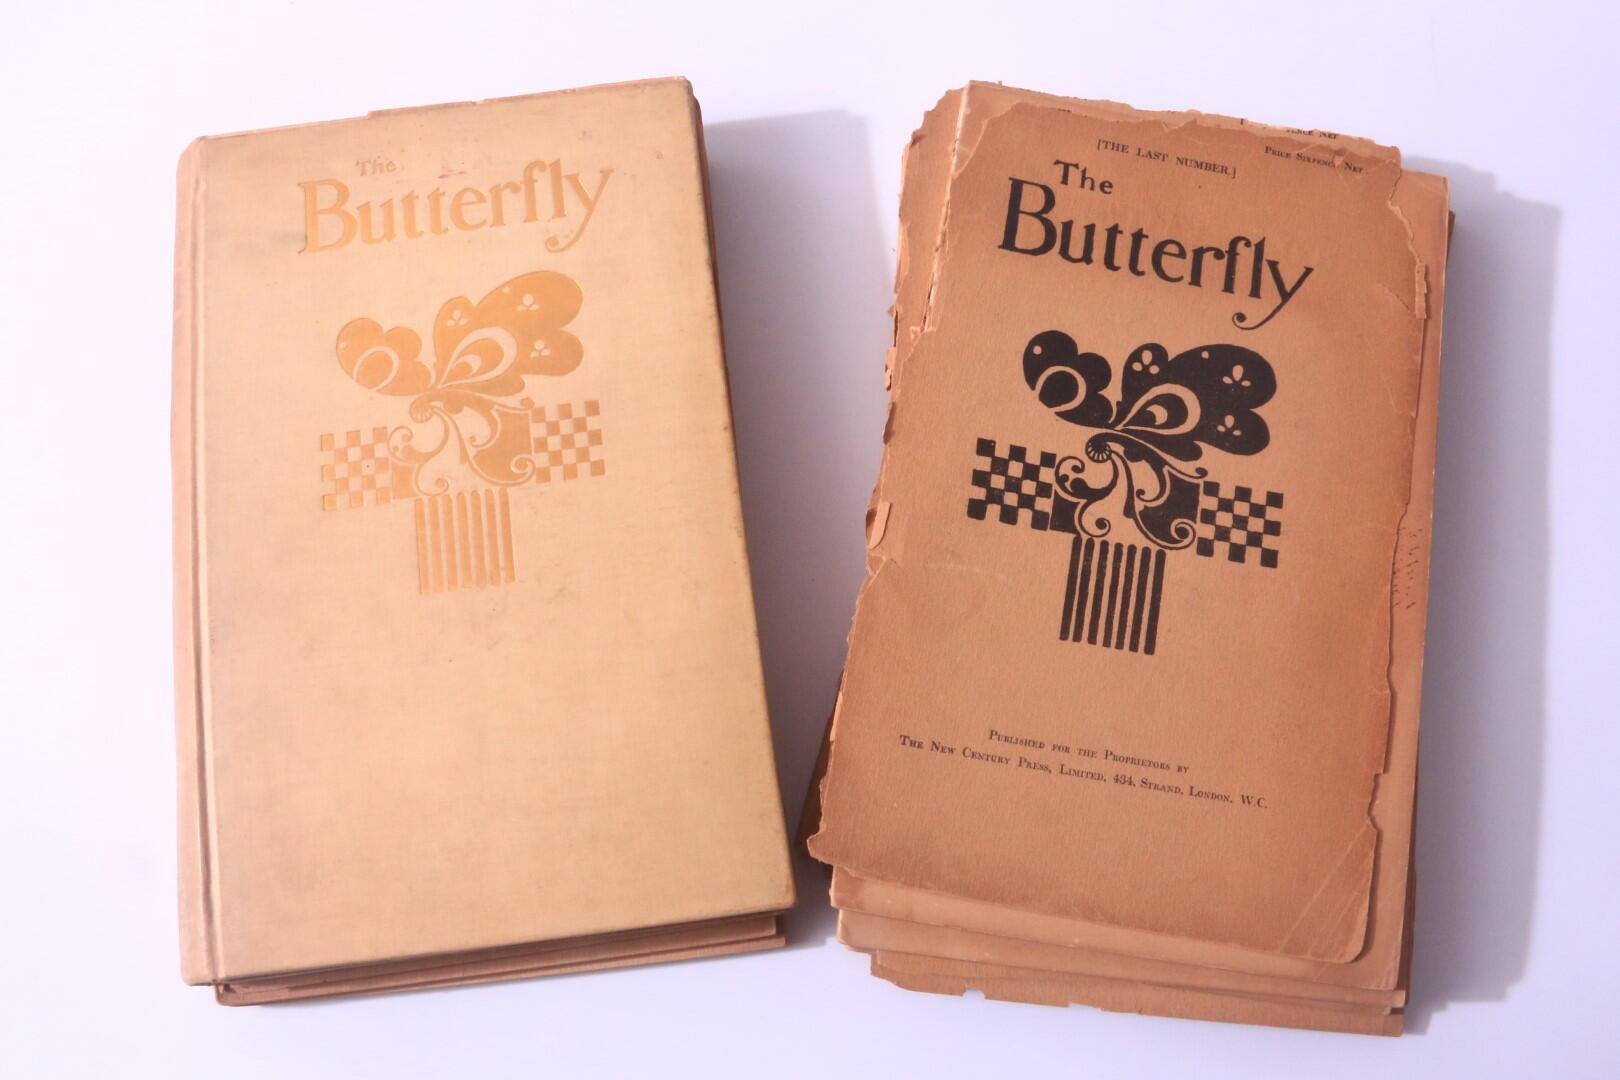 Various - The Butterfly: A Full Run - Grant Richards, 1899-1900, First Edition.